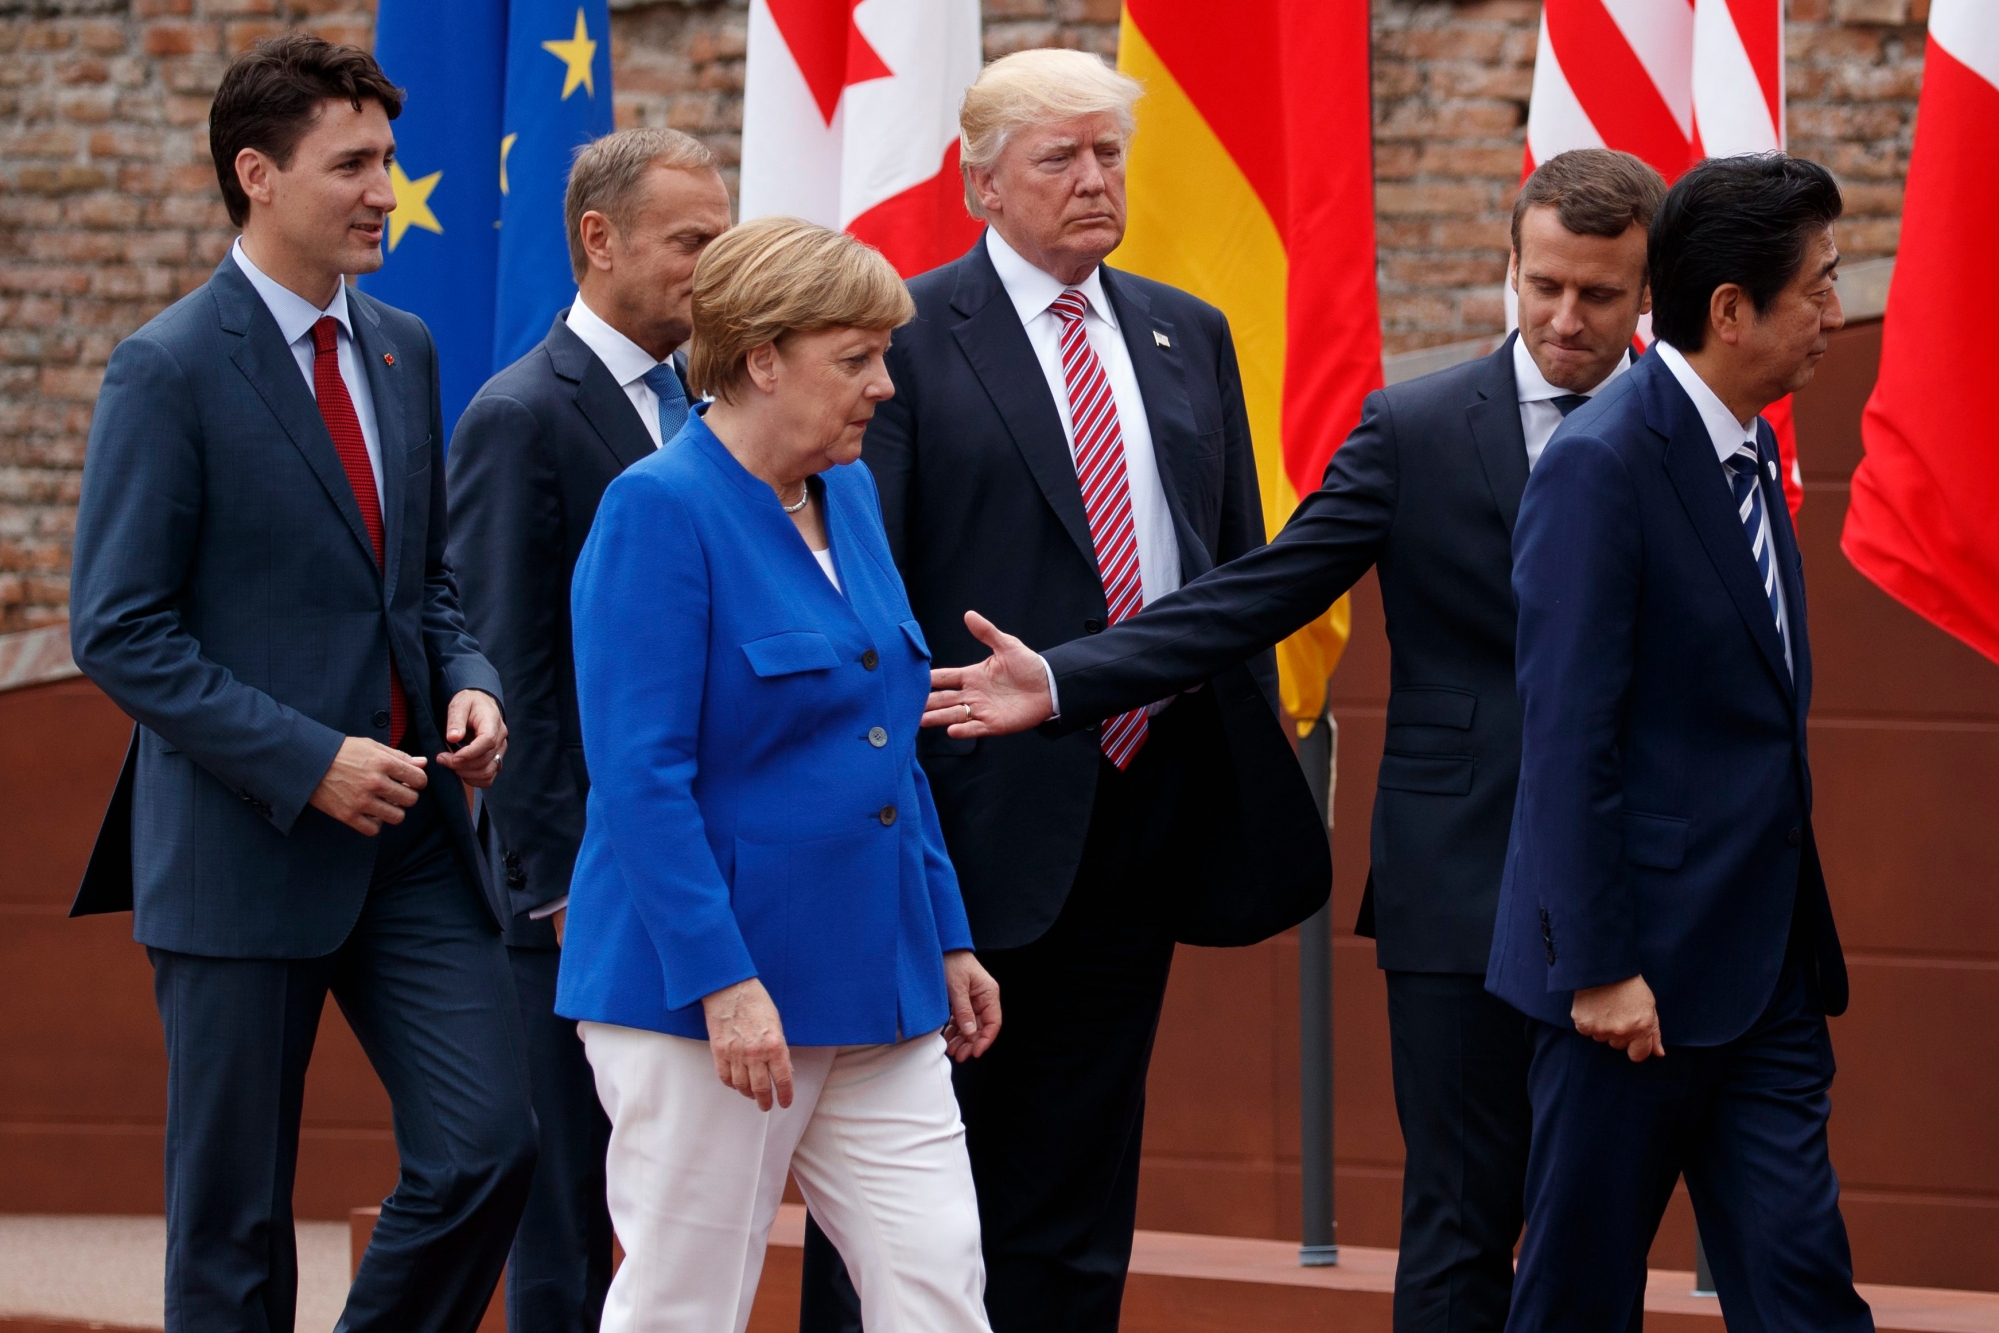 G7 leaders, from left, Canadian Prime Minister Justin Trudeau, President of the European Commission Jean-Claude Junker, German Chancellor Angela Merkel, President Donald Trump, French President Emmanuel Macron, and Japanese Prime Minister Shinzo Abe walk off after a family photo at the Ancient Greek Theater of Taormina, Friday, May 26, 2017, in Taormina, Italy. (AP Photo/Evan Vucci) TRUMP US G7